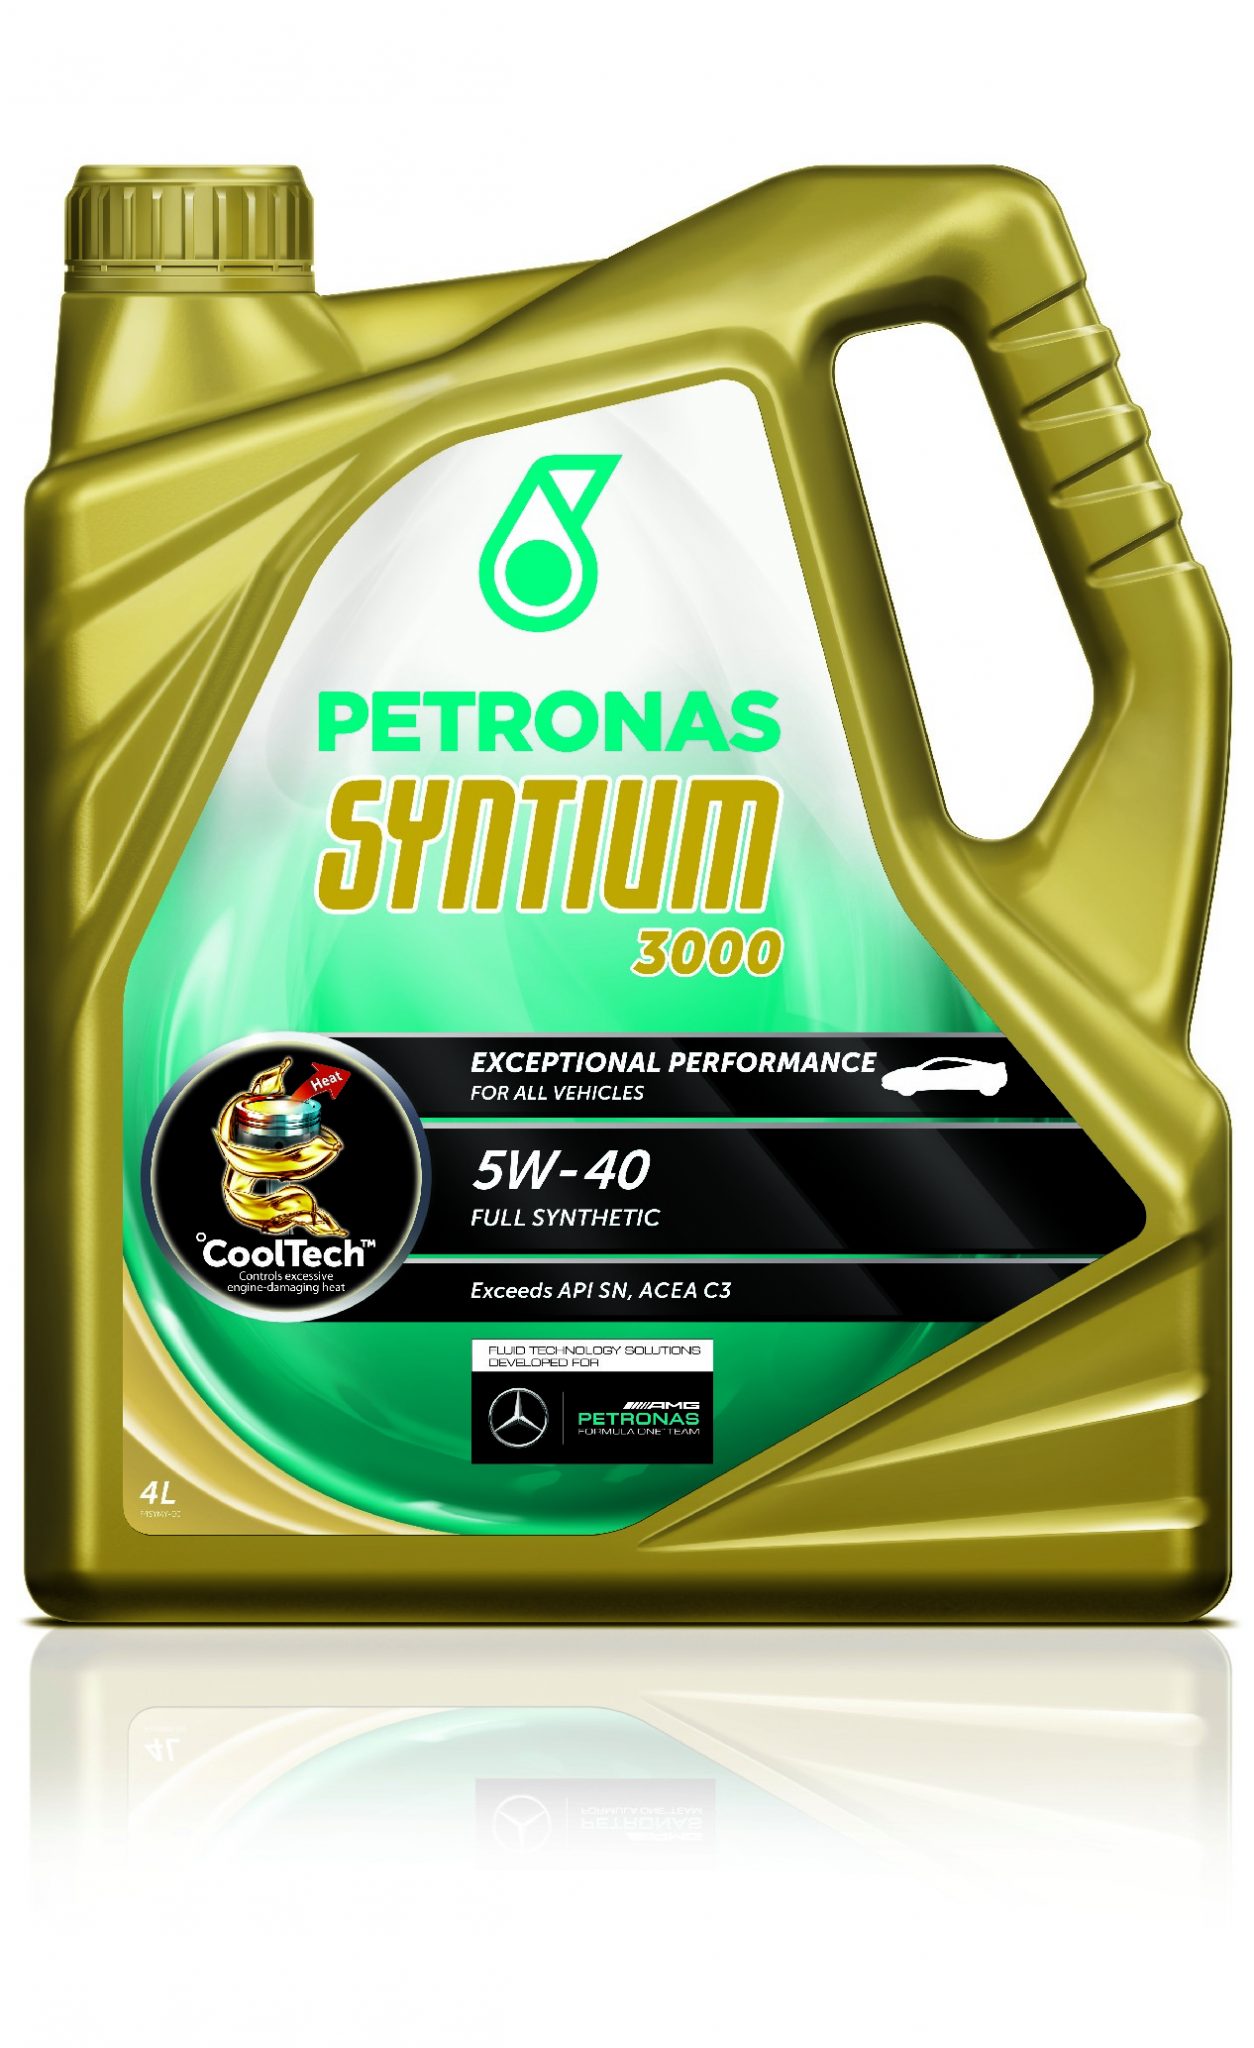 03 PETRONAS Syntium with CoolTech 3000 5W-40